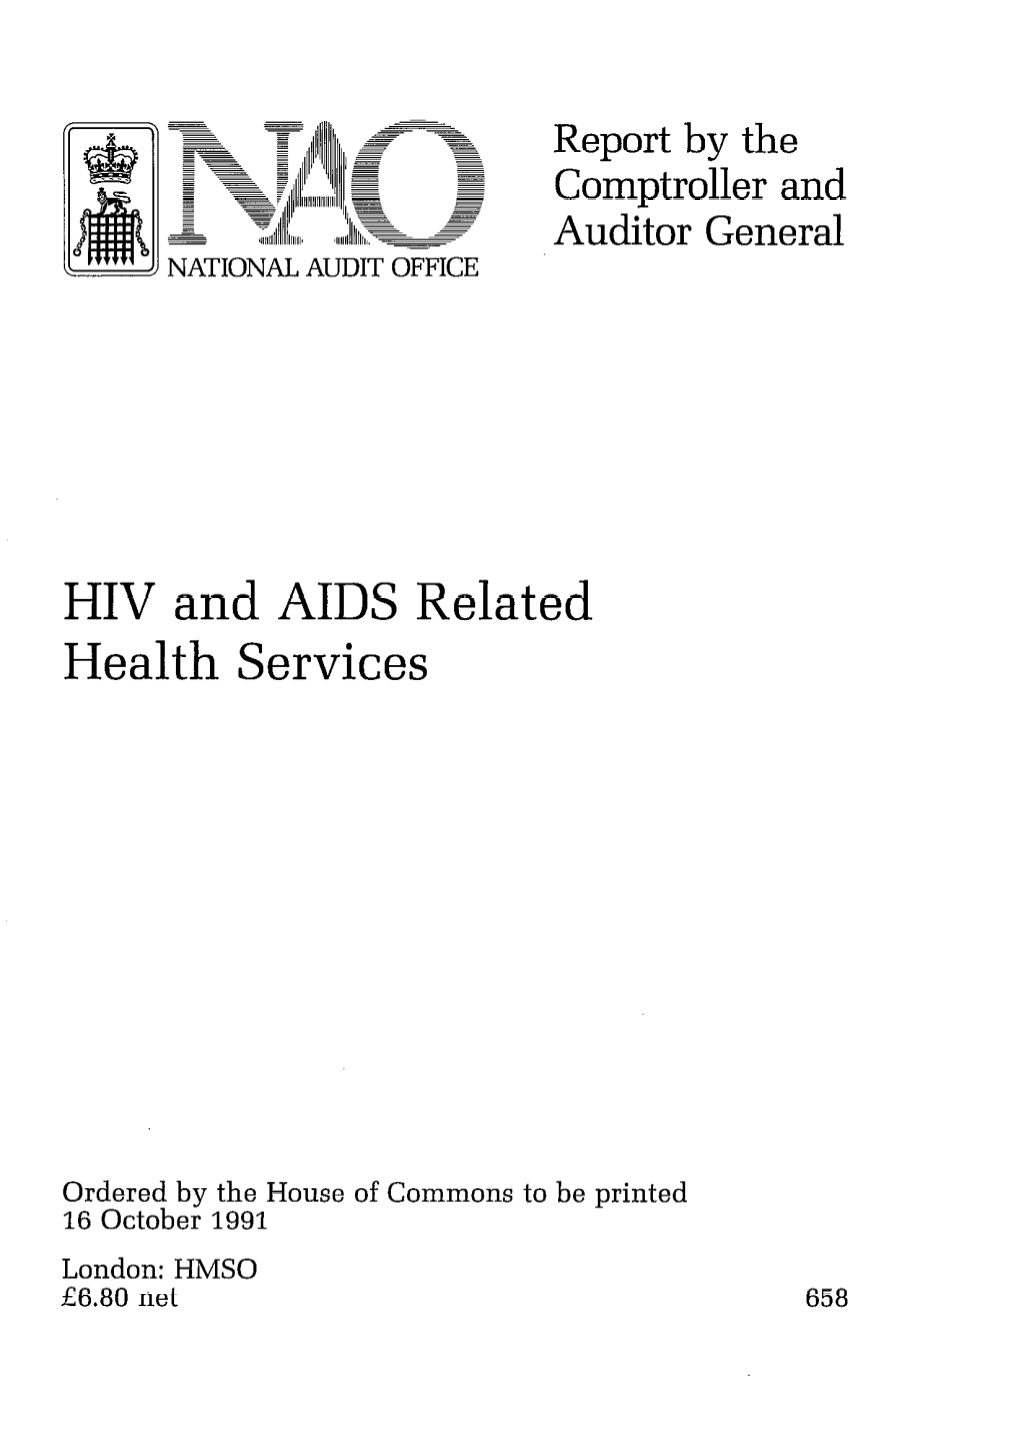 HIV and AIDS Related Health Services